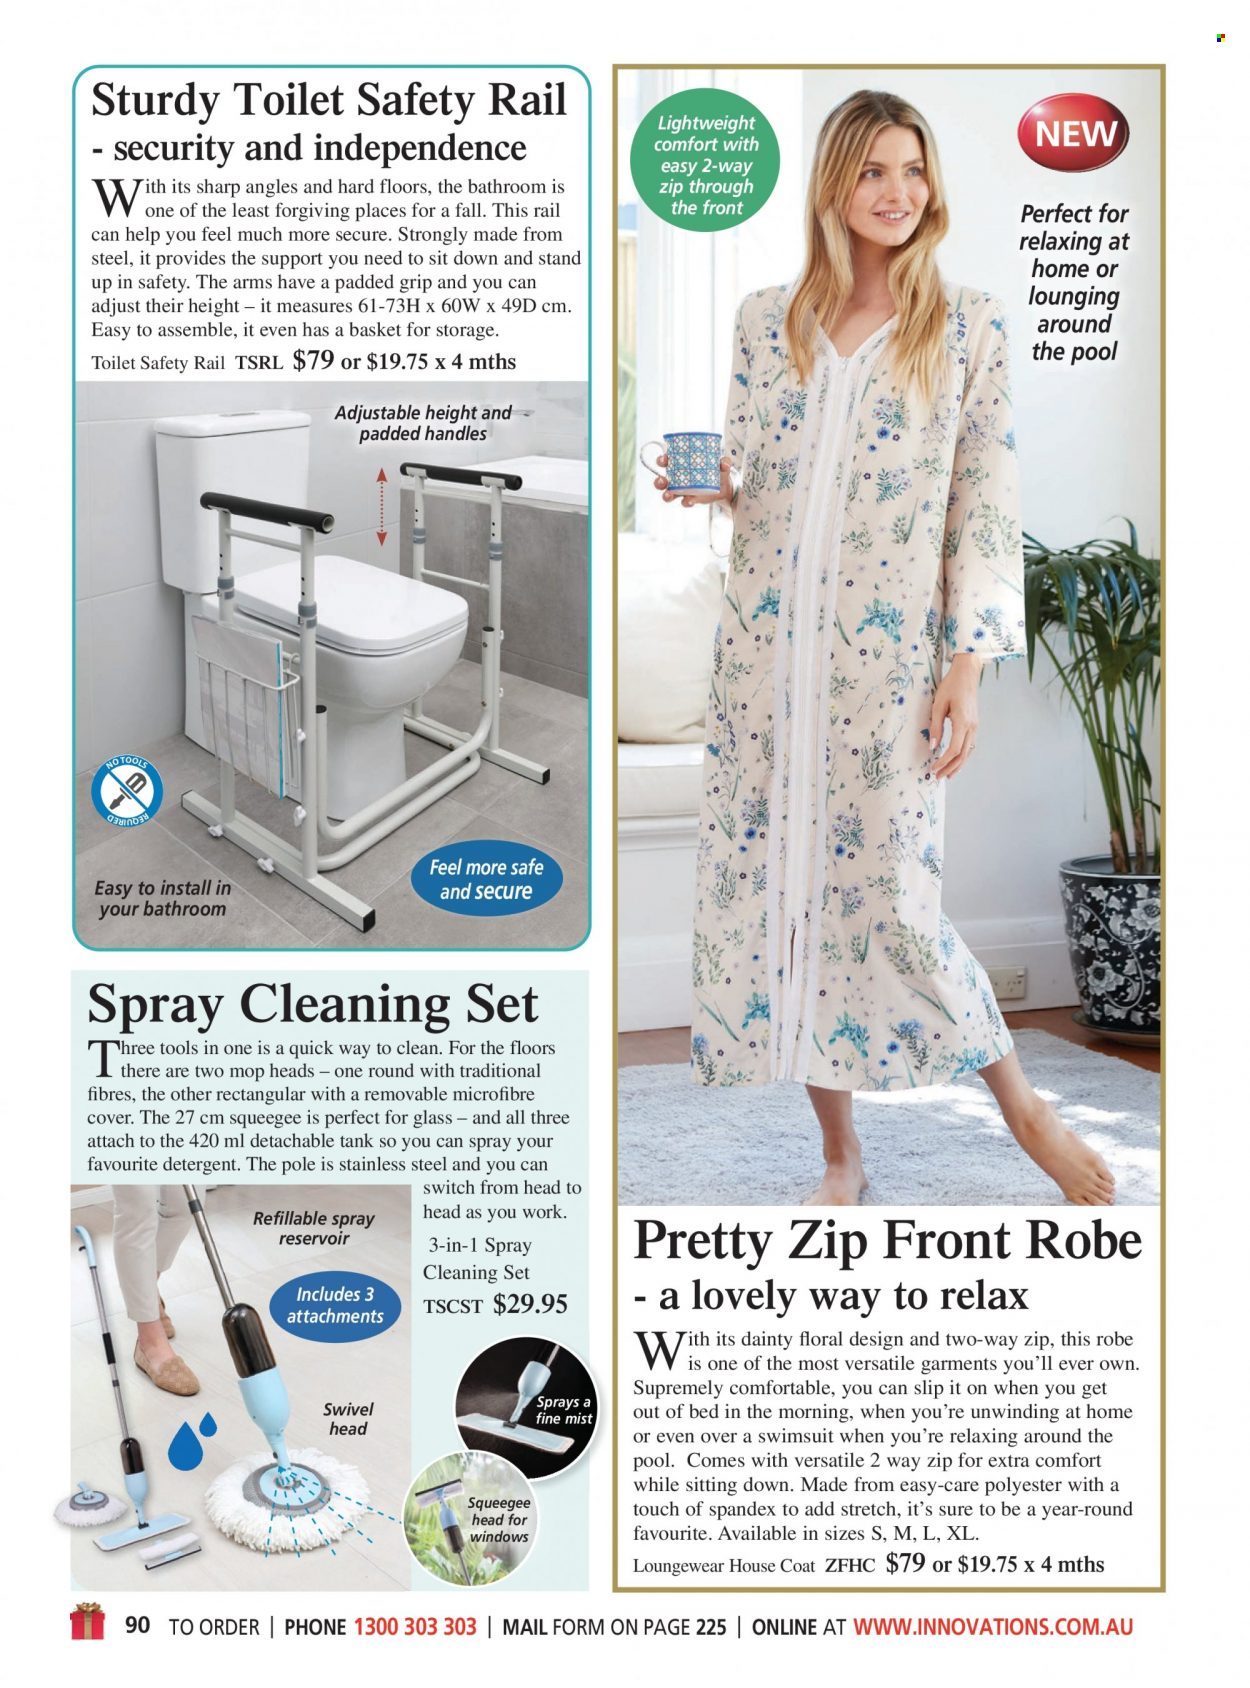 thumbnail - Innovations Catalogue - Sales products - basket, cleaning set, mop, Sharp, microfibre cover, tank, coat, loungewear, costume, robe, swimming suit. Page 90.